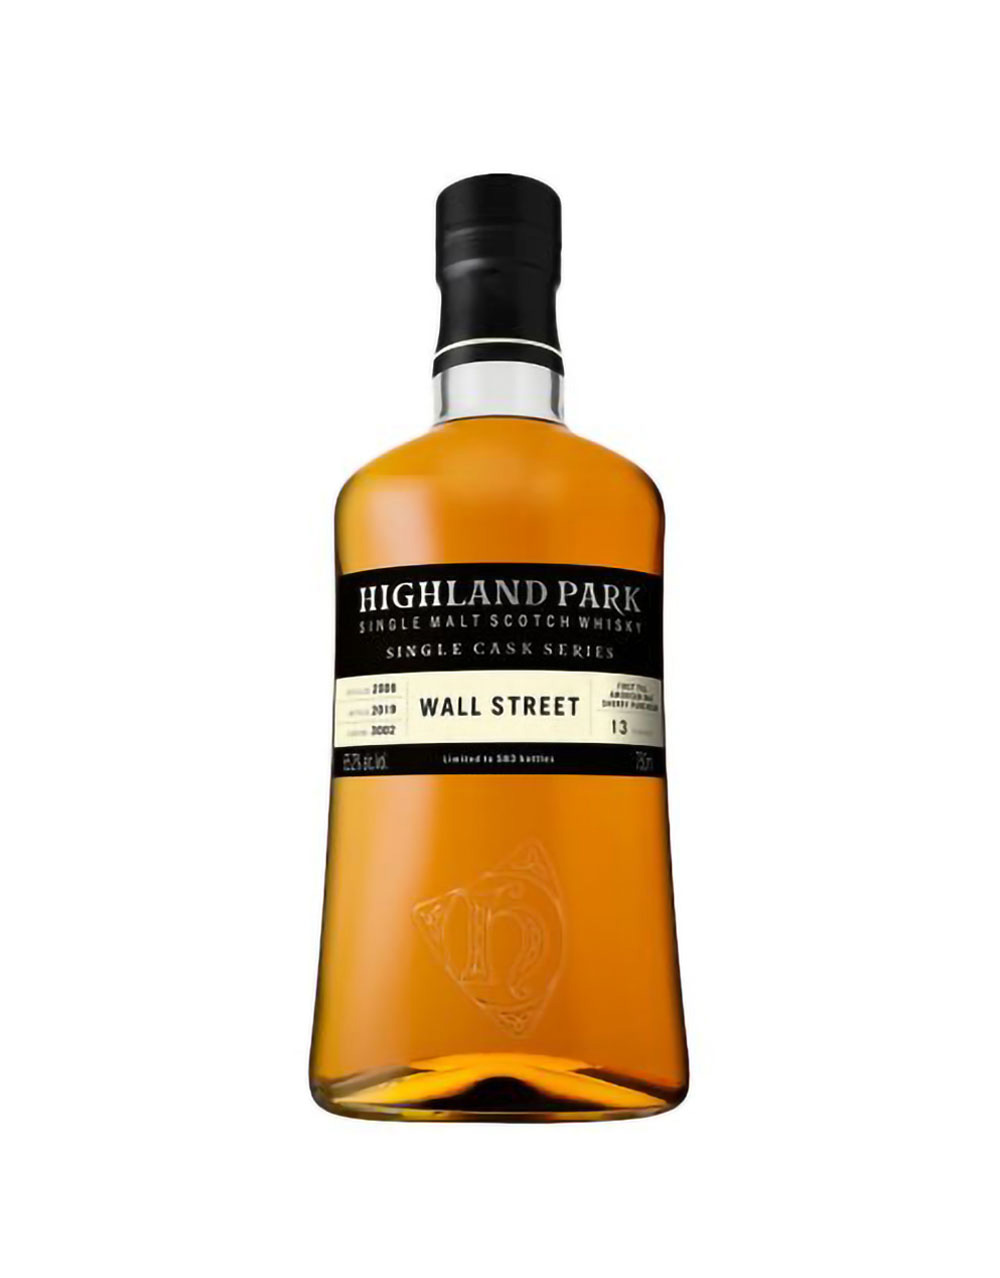 Highland Park Single Cask Series 'Wall Street' 13 Year Old